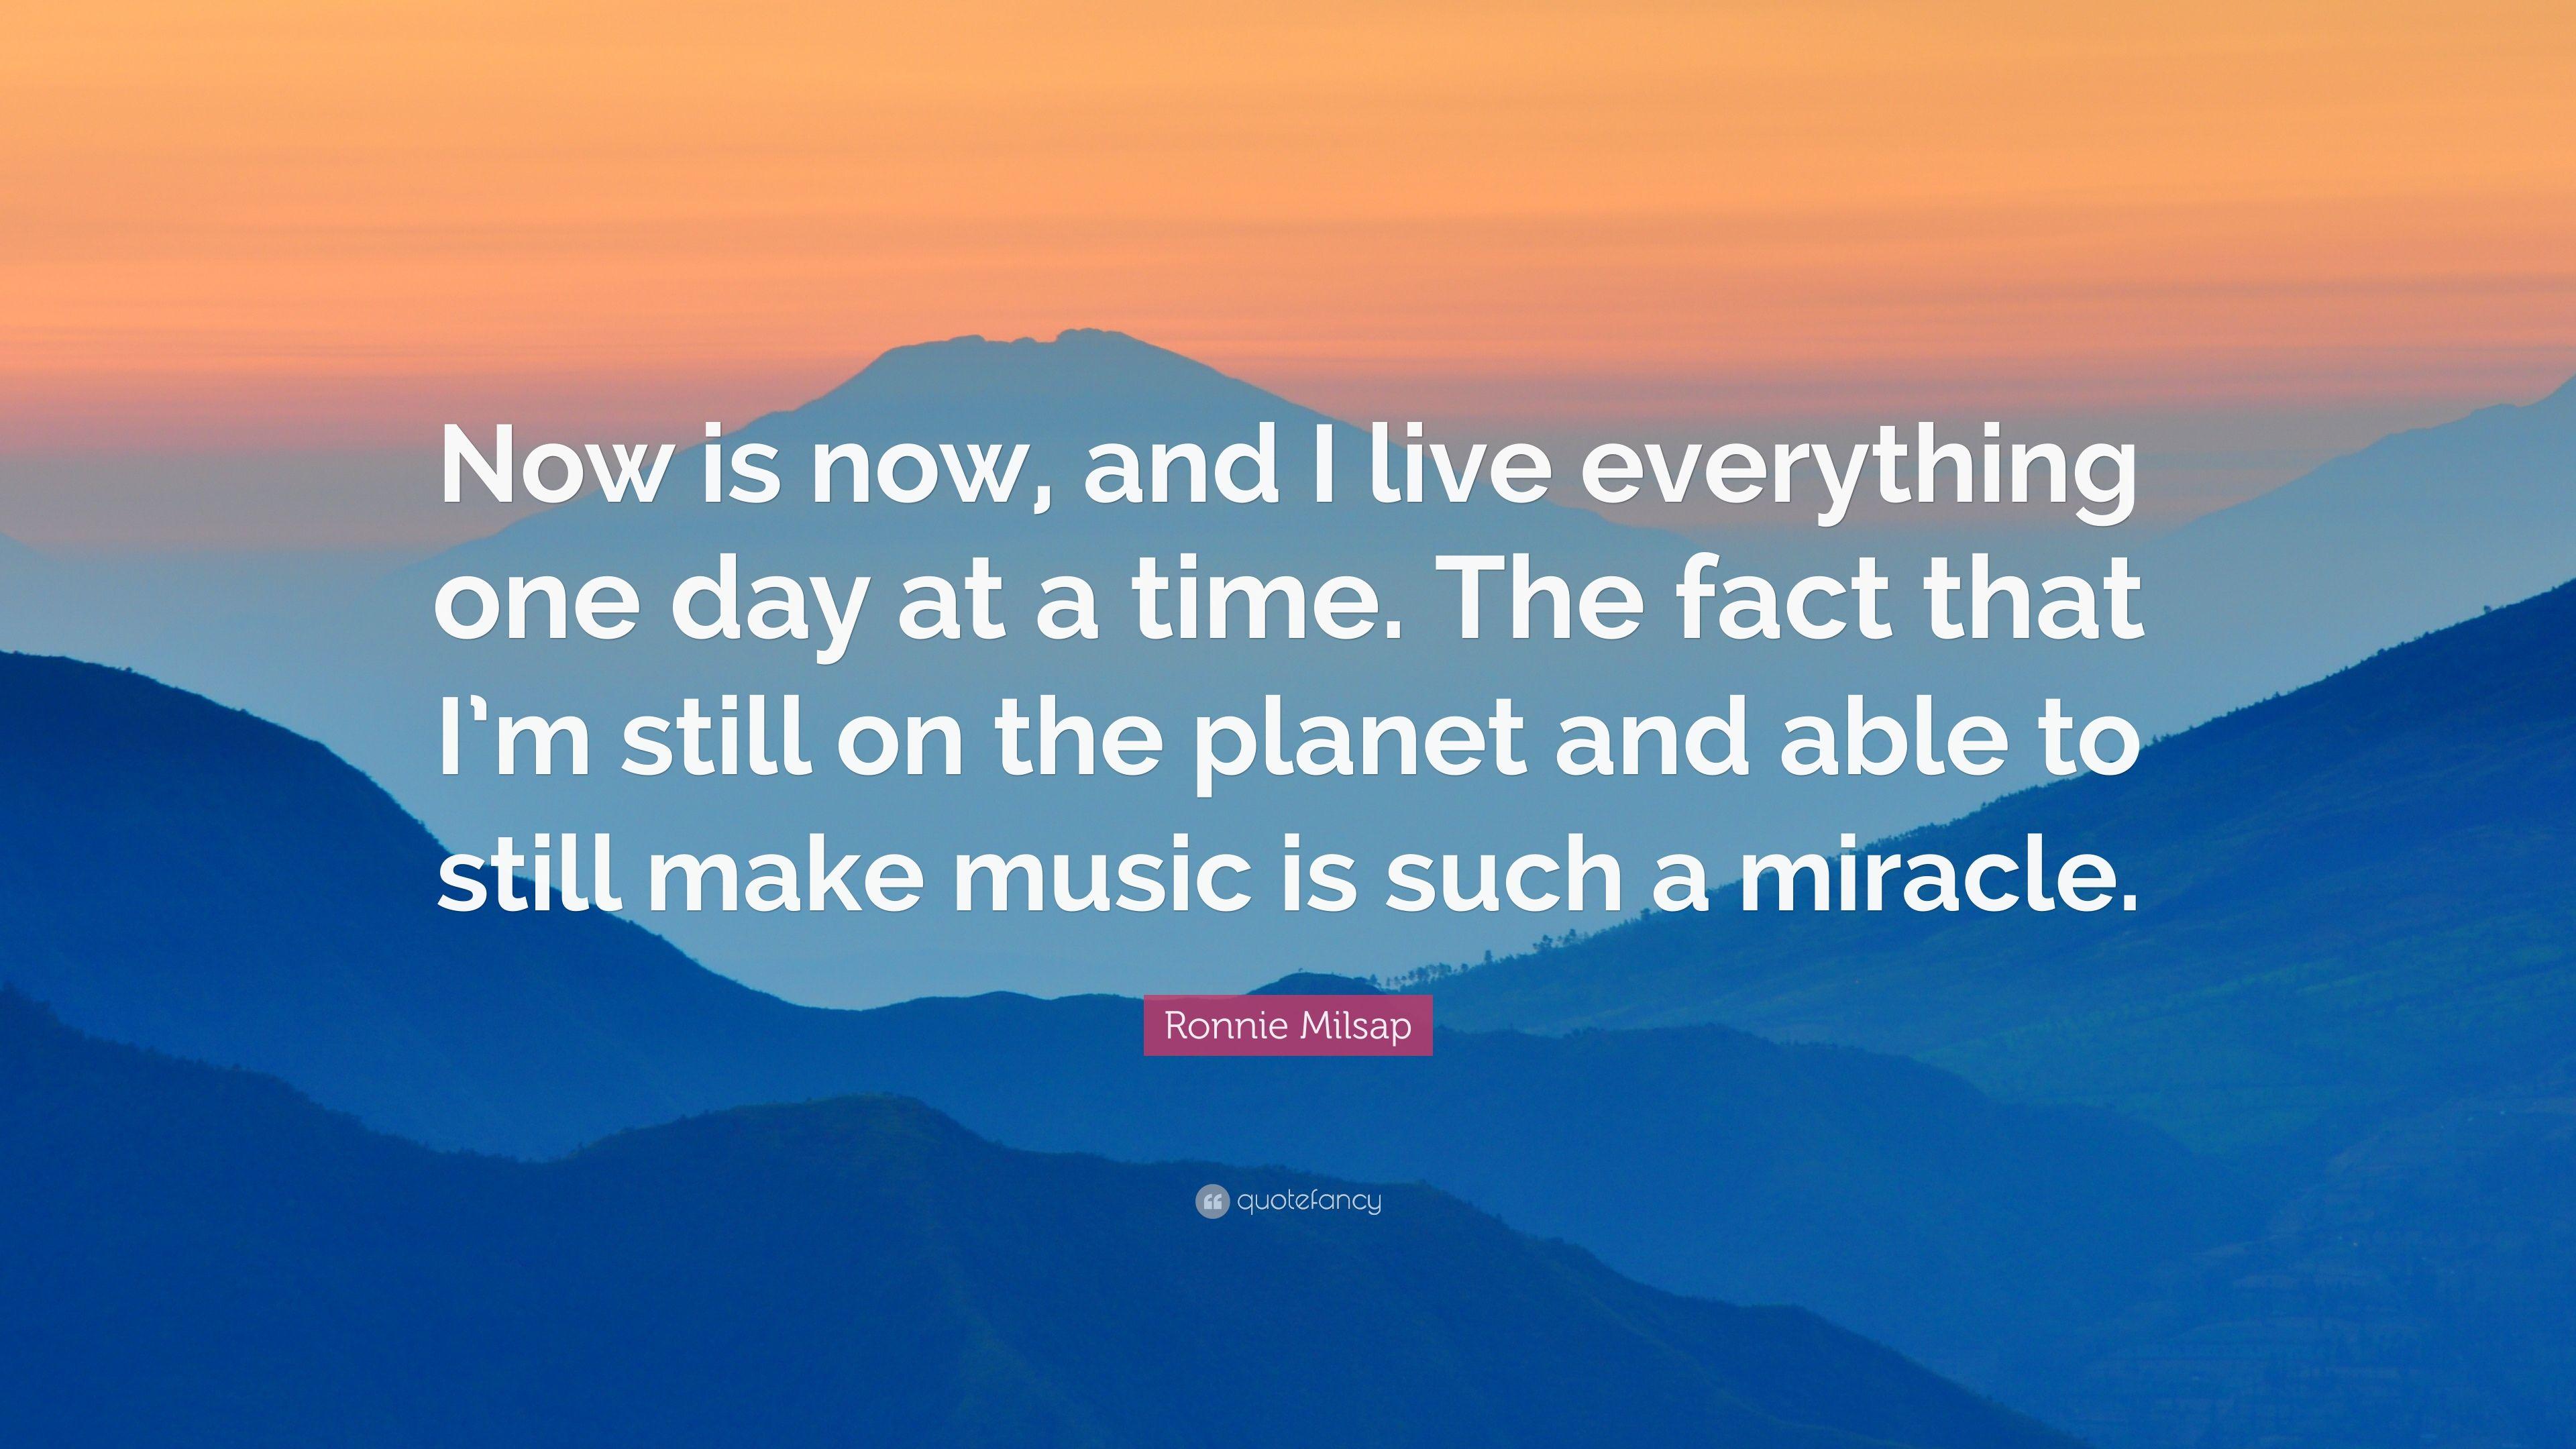 Ronnie Milsap Quote: “Now is now, and I live everything one day at